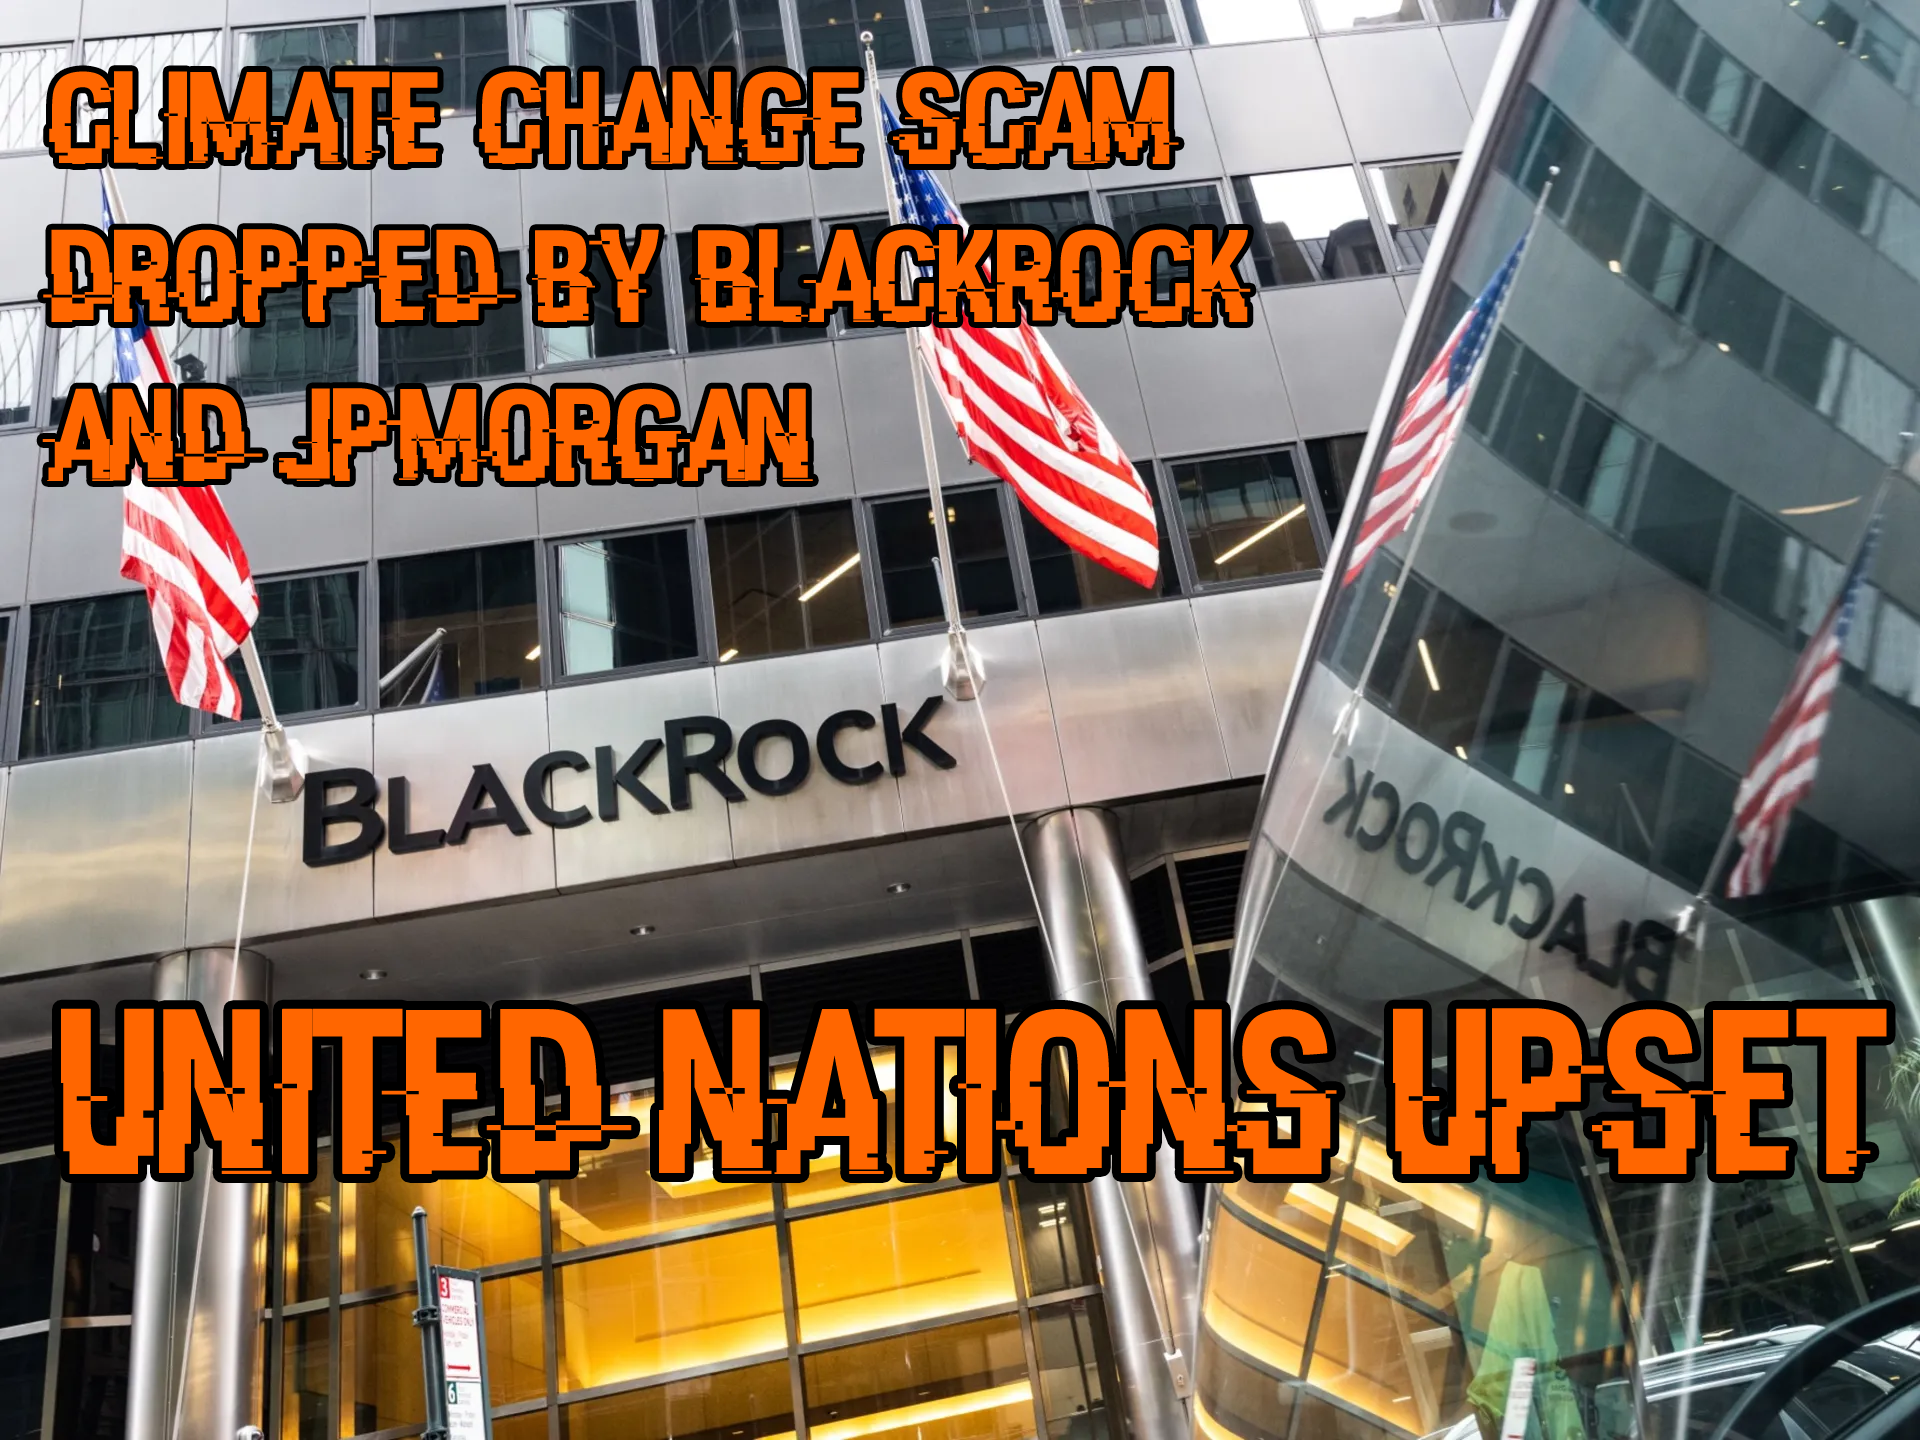 JPMorgan and Blackrock pull out of UN Climate agreement.